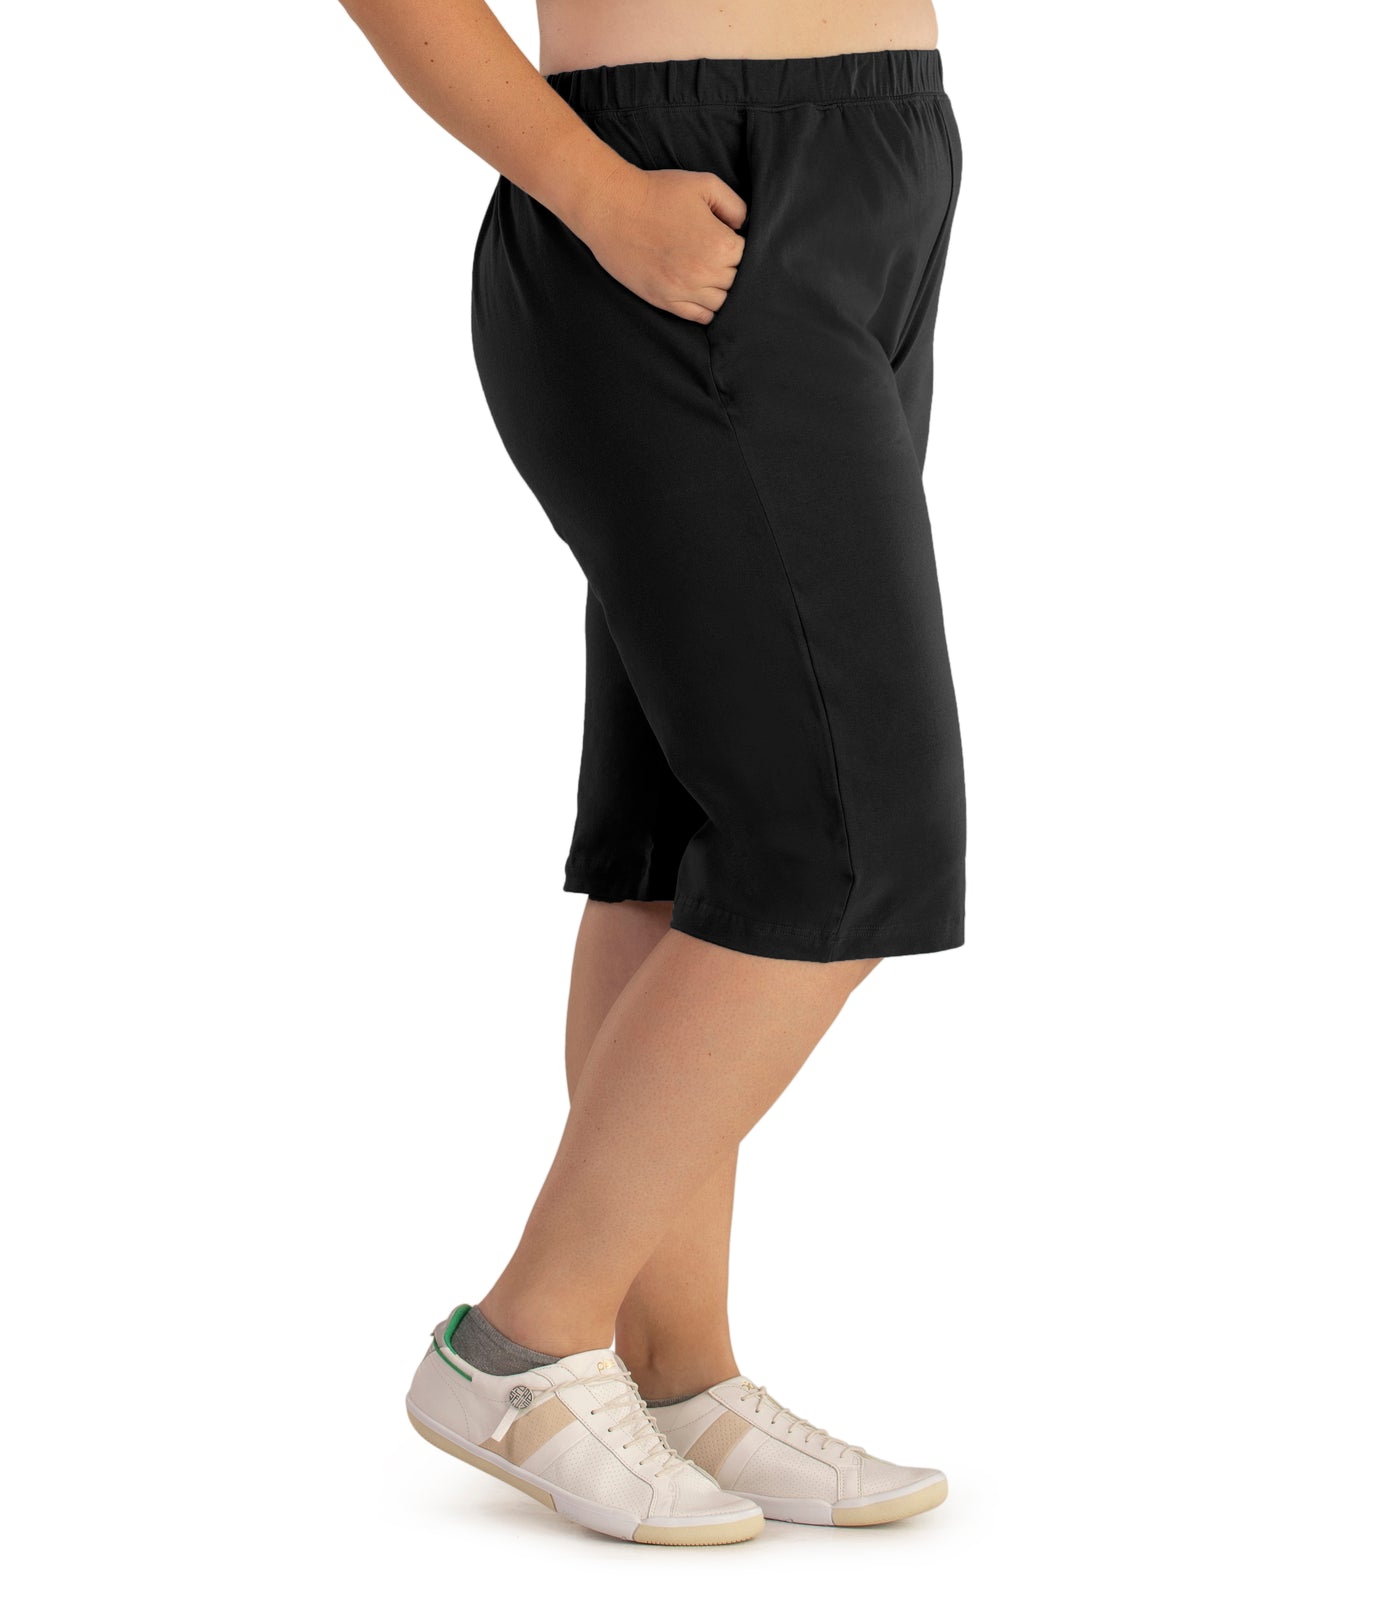 Bottom half of plus sized woman, side view, wearing JunoActive Stretch Naturals Bermuda Shorts in color black. Bottom hem is at the knee.